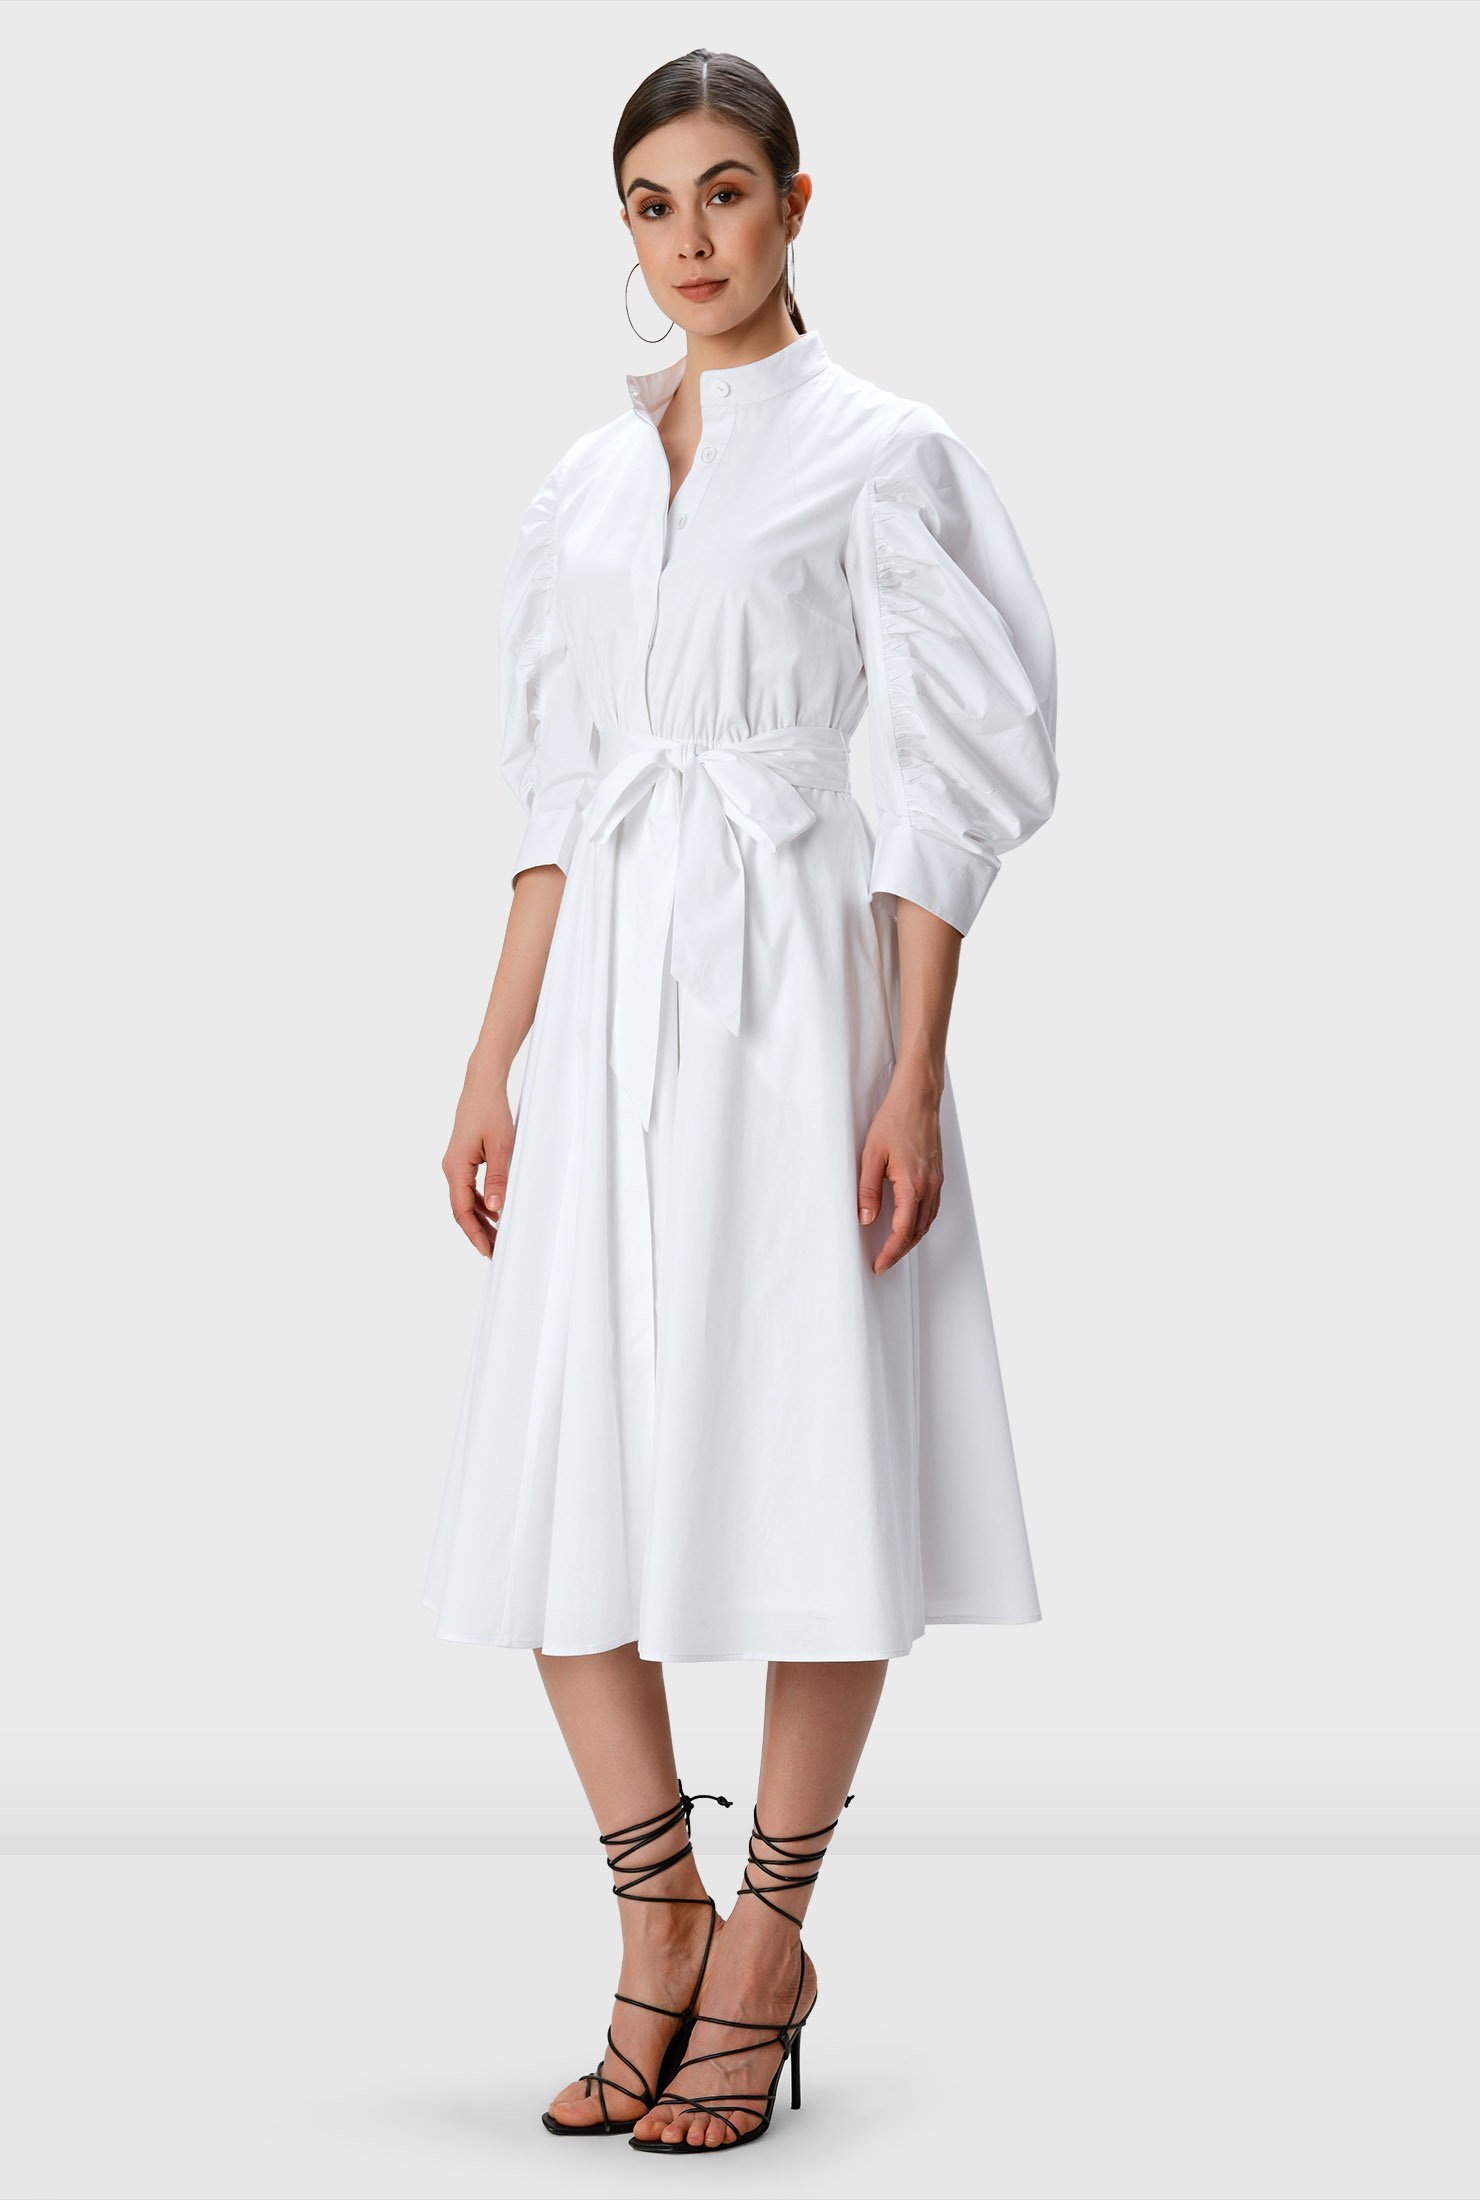 Our feminine ruched dress in crisp cotton poplin with its ruched sleeves and flair for the dramatic is cinched in with an optional self-sash-tie belt at the elastic waist. 